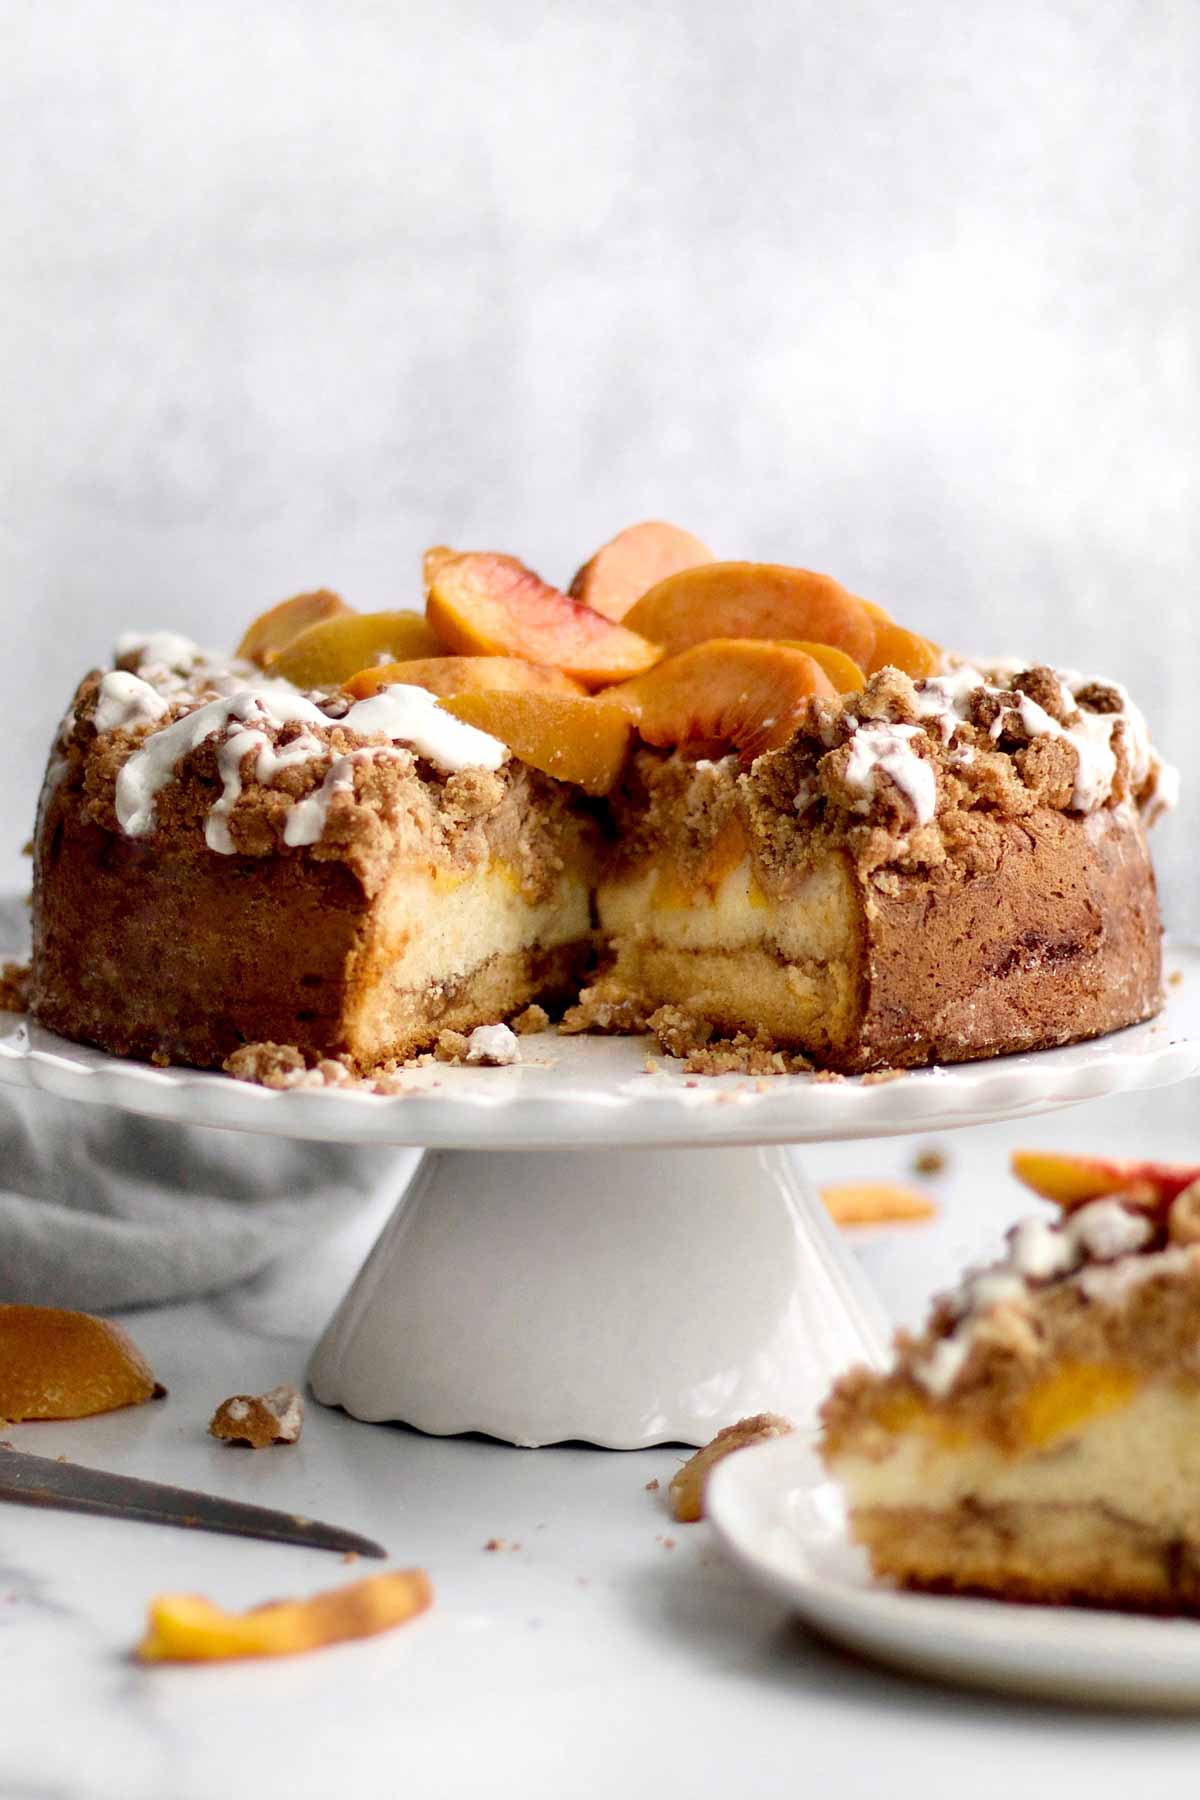 A Peach Cobbler Cake with a slice missing.